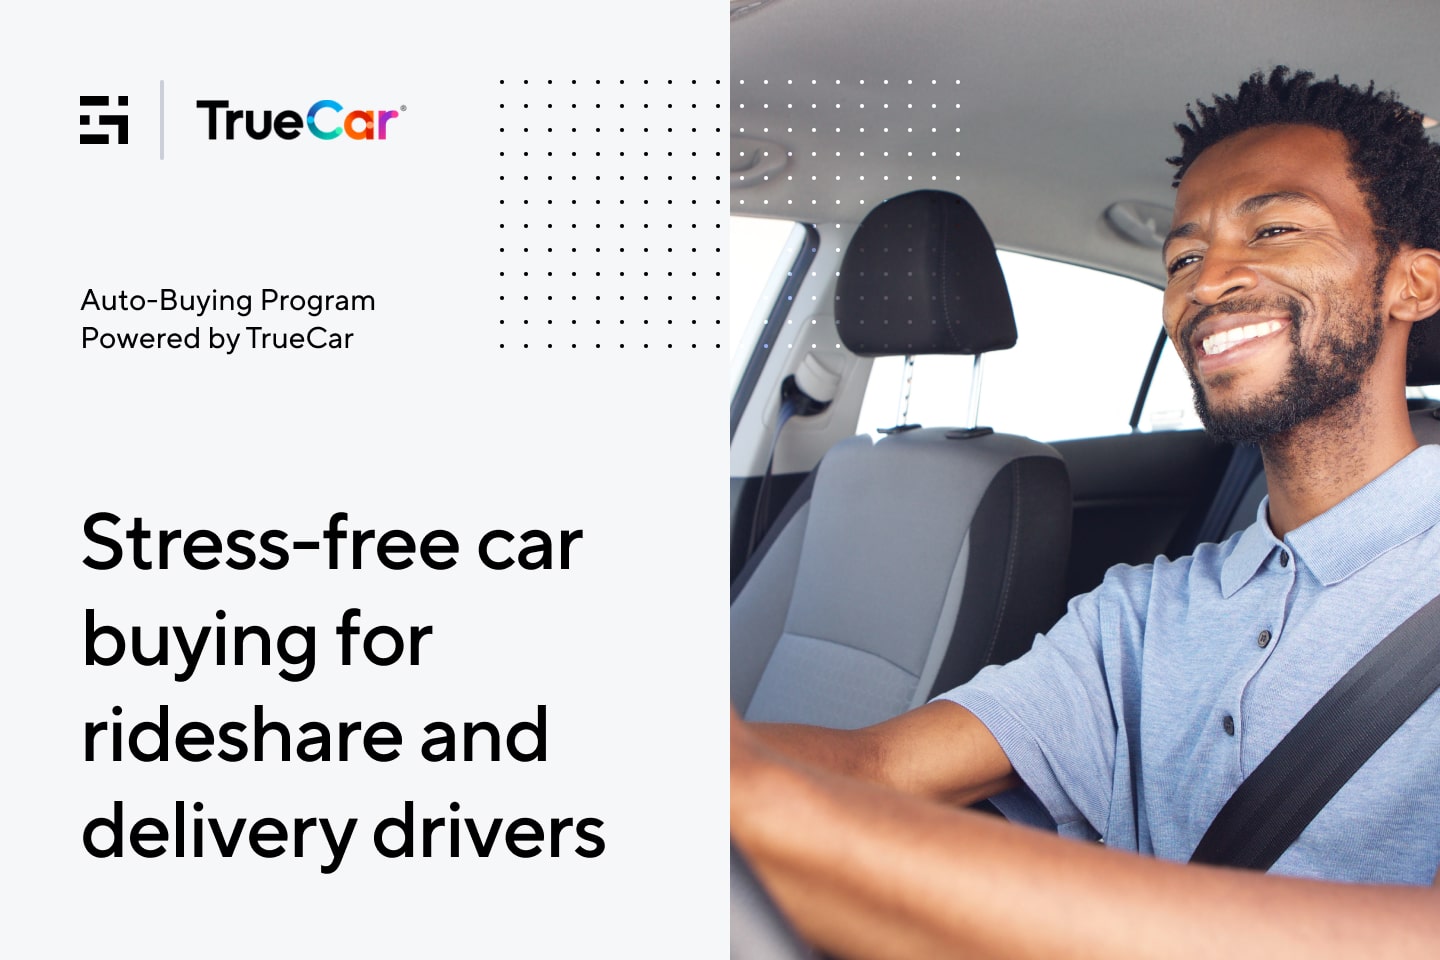 Stress free car buying for rideshare and delivery Drivers